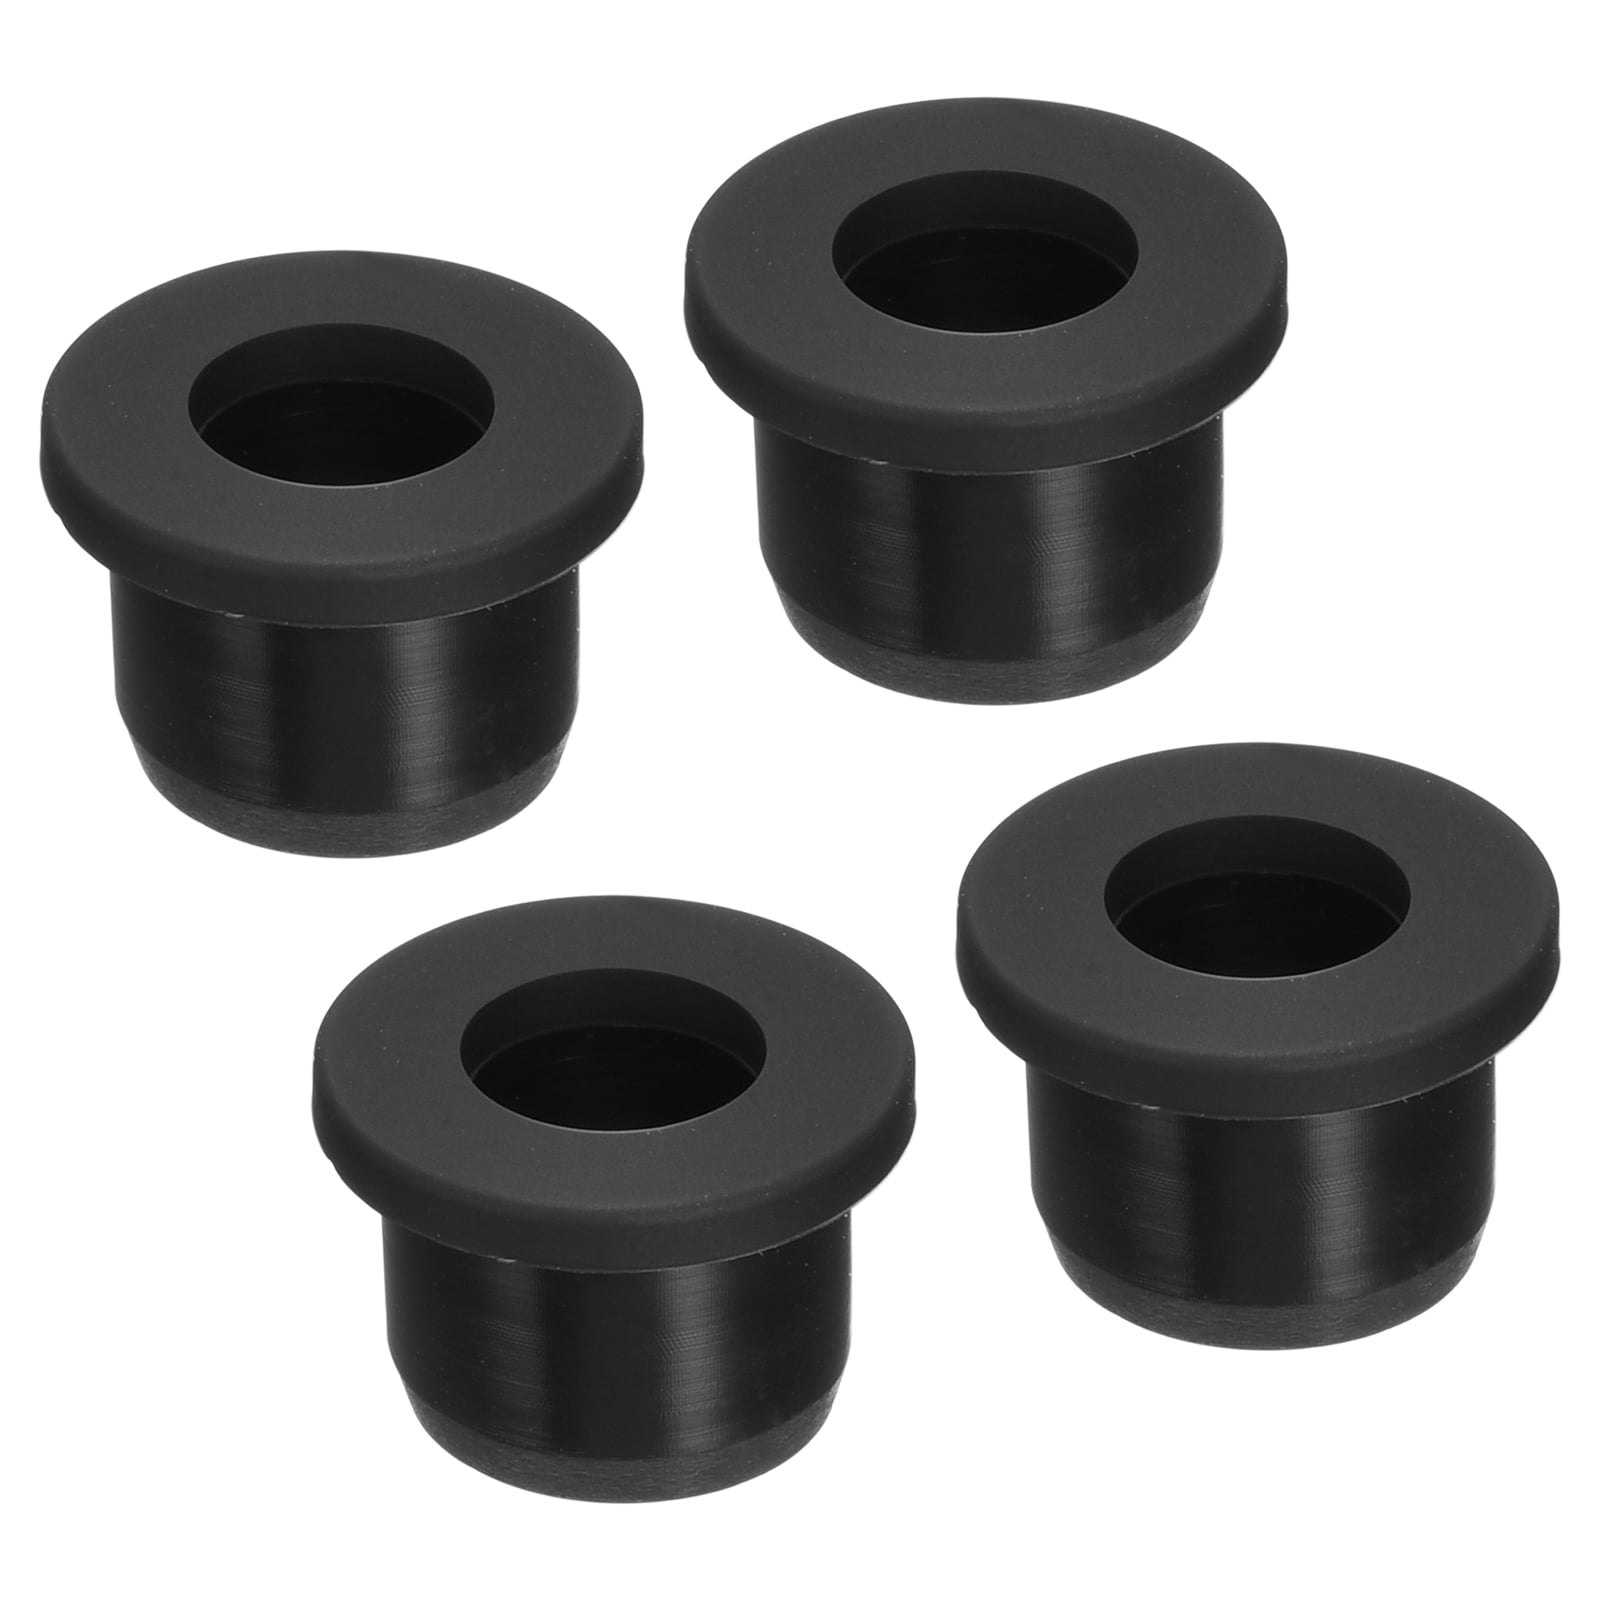 Uxcell Rubber Grommet Mount Dia 15/32 inch (12mm) Round T Type for Wire Protection 4 Pack, Size: 15/32 x 19/64 x 5/8 -Inch, Black